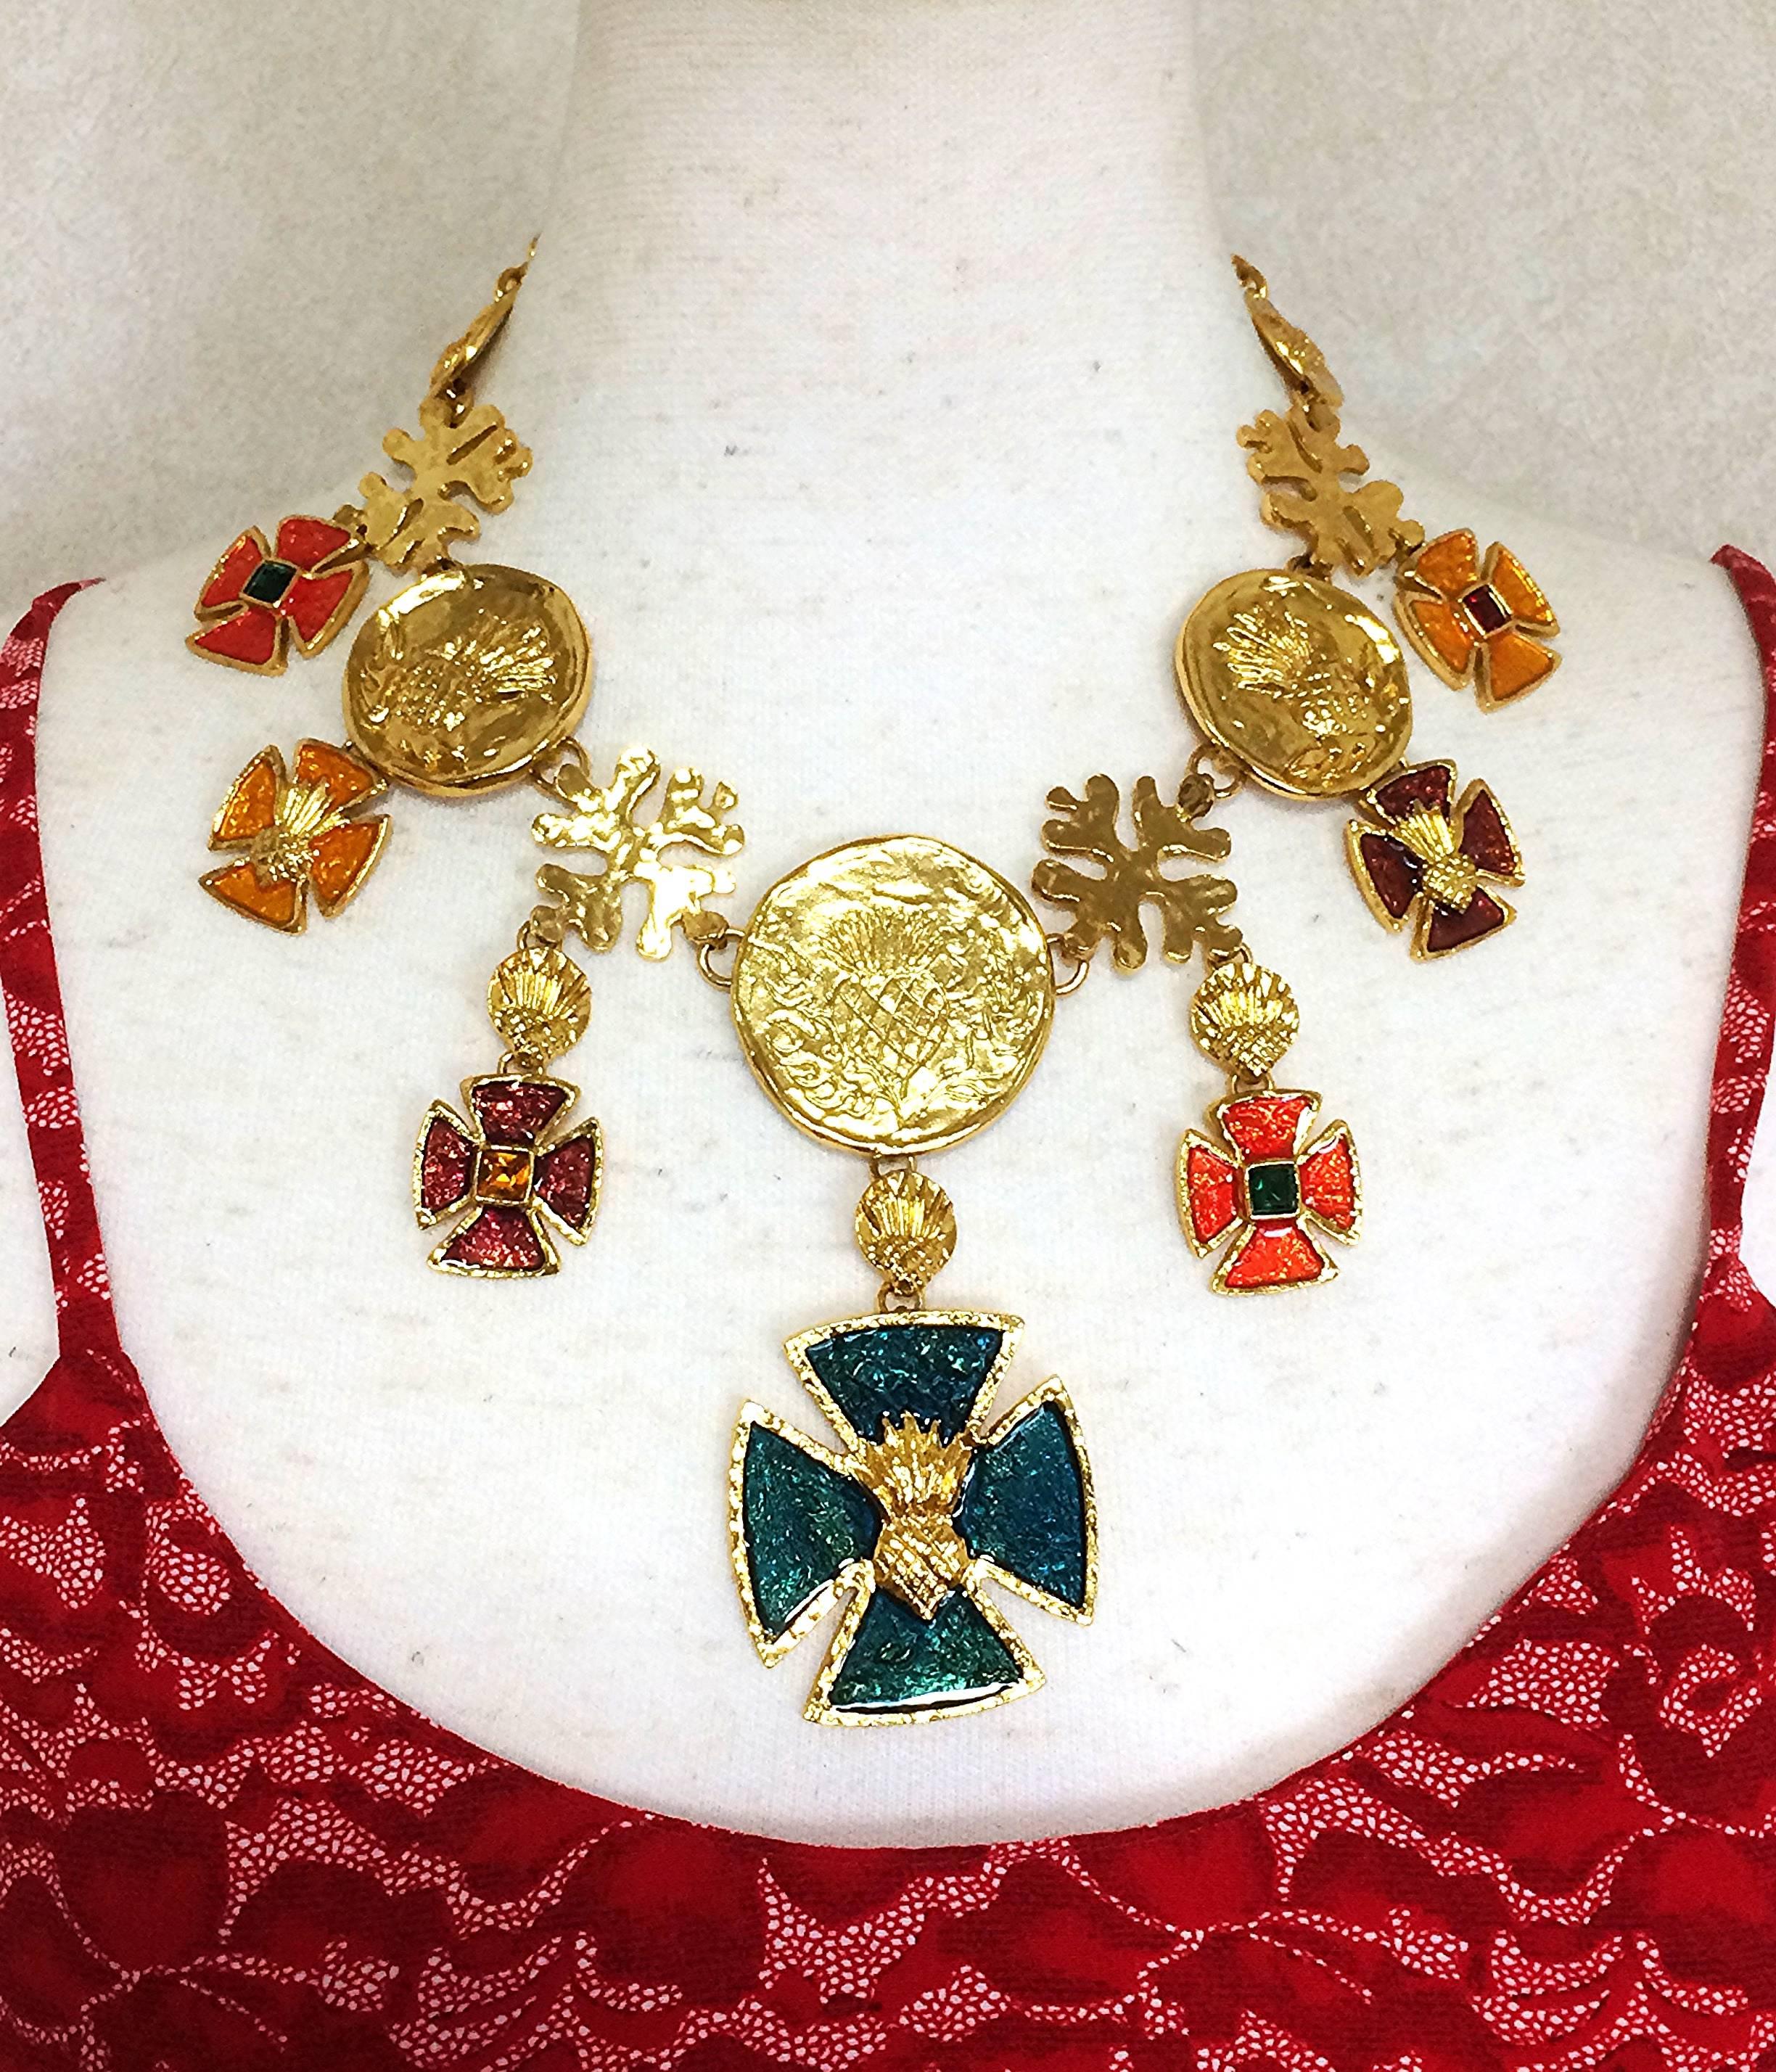 MINT. Vintage Yves Saint Laurent statement necklace with blue, wine, orange, yellow, and green colorful enamel cross and coin motif charms. 

Introducing a one-of-a-kind, Yves Saint Laurent Haute Couture collection statement necklace from the